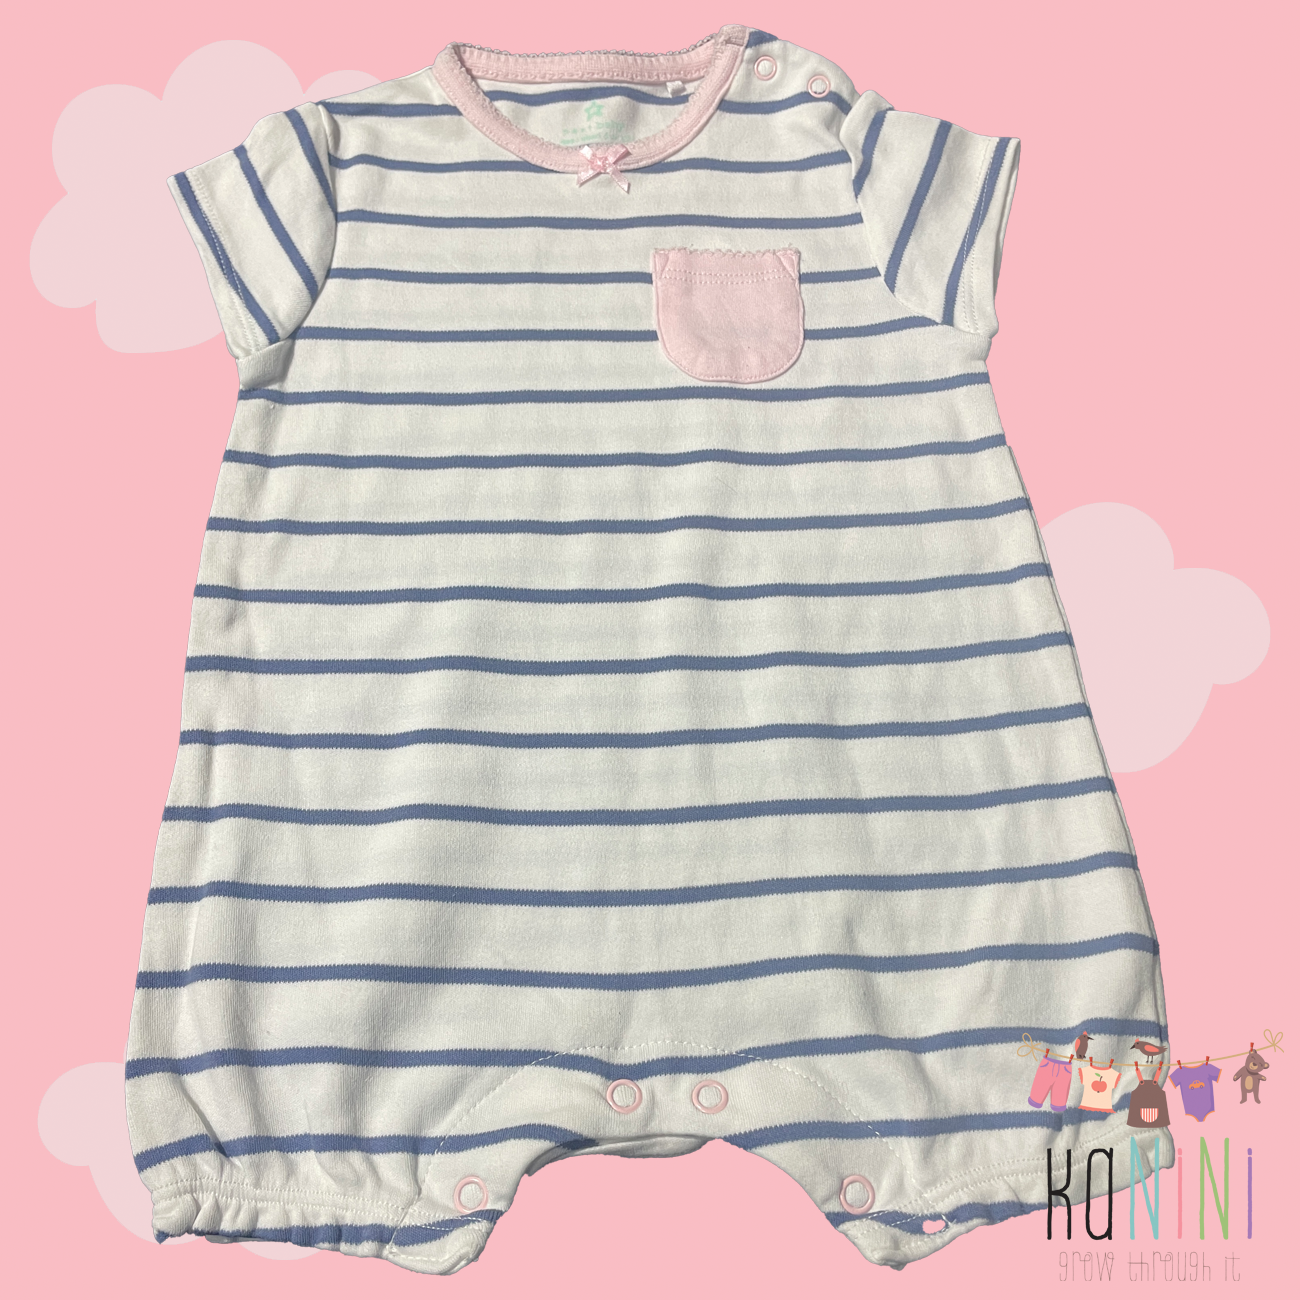 Featured image for “UK Next 3 - 6 Months Girls Striped Romper”